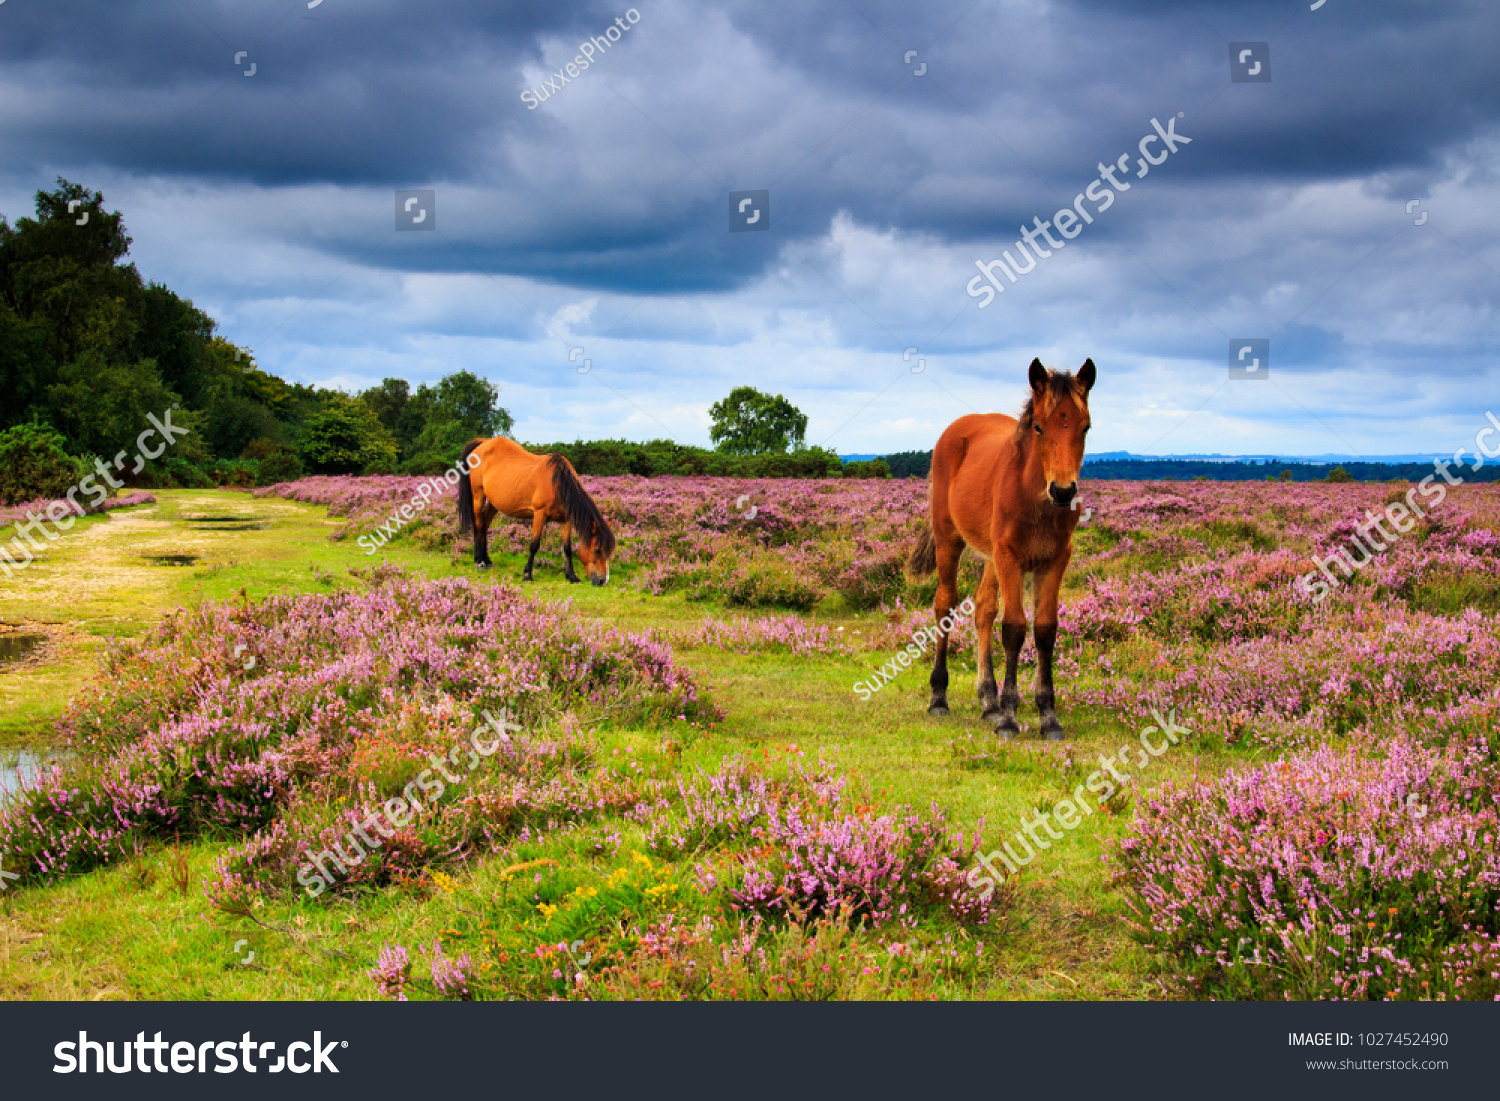 A walk around the new forest in Hamsphire south east England on a cloudy August day #1027452490